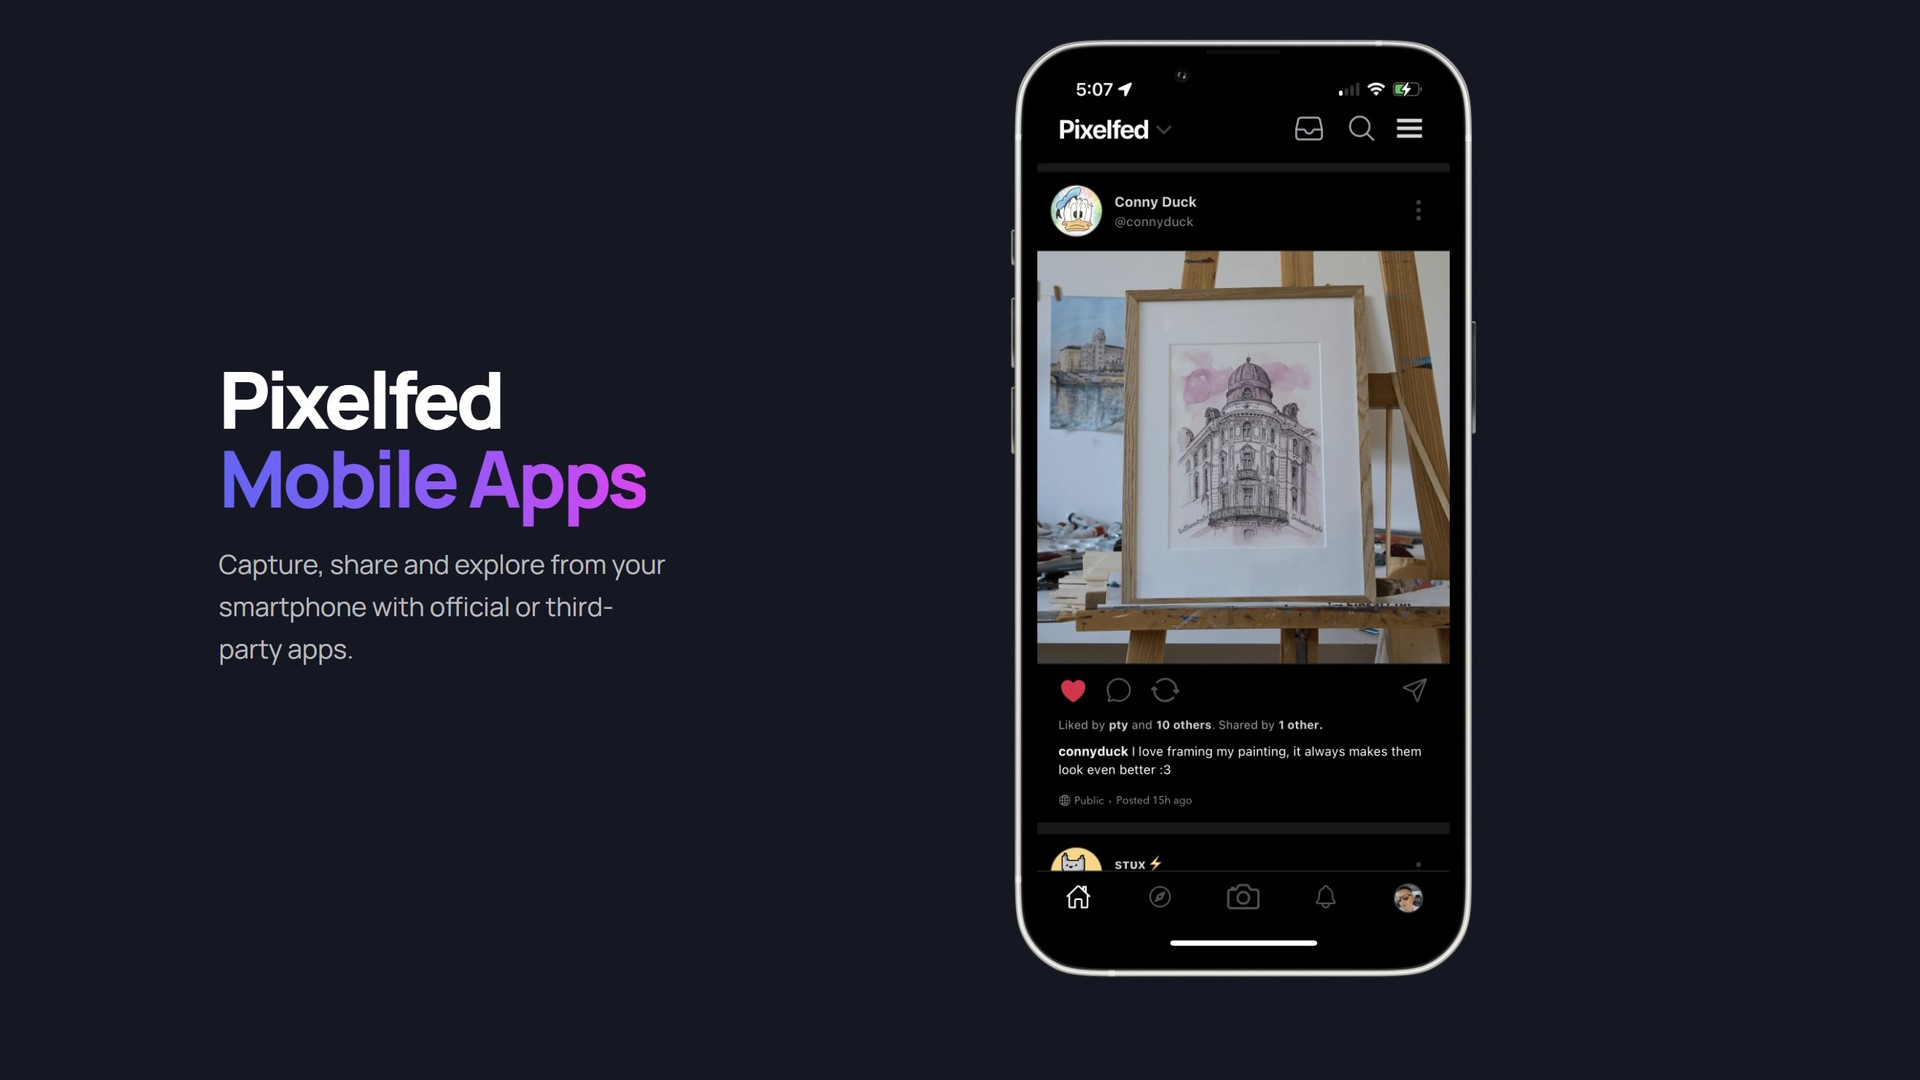 Pixelfed mobile apps